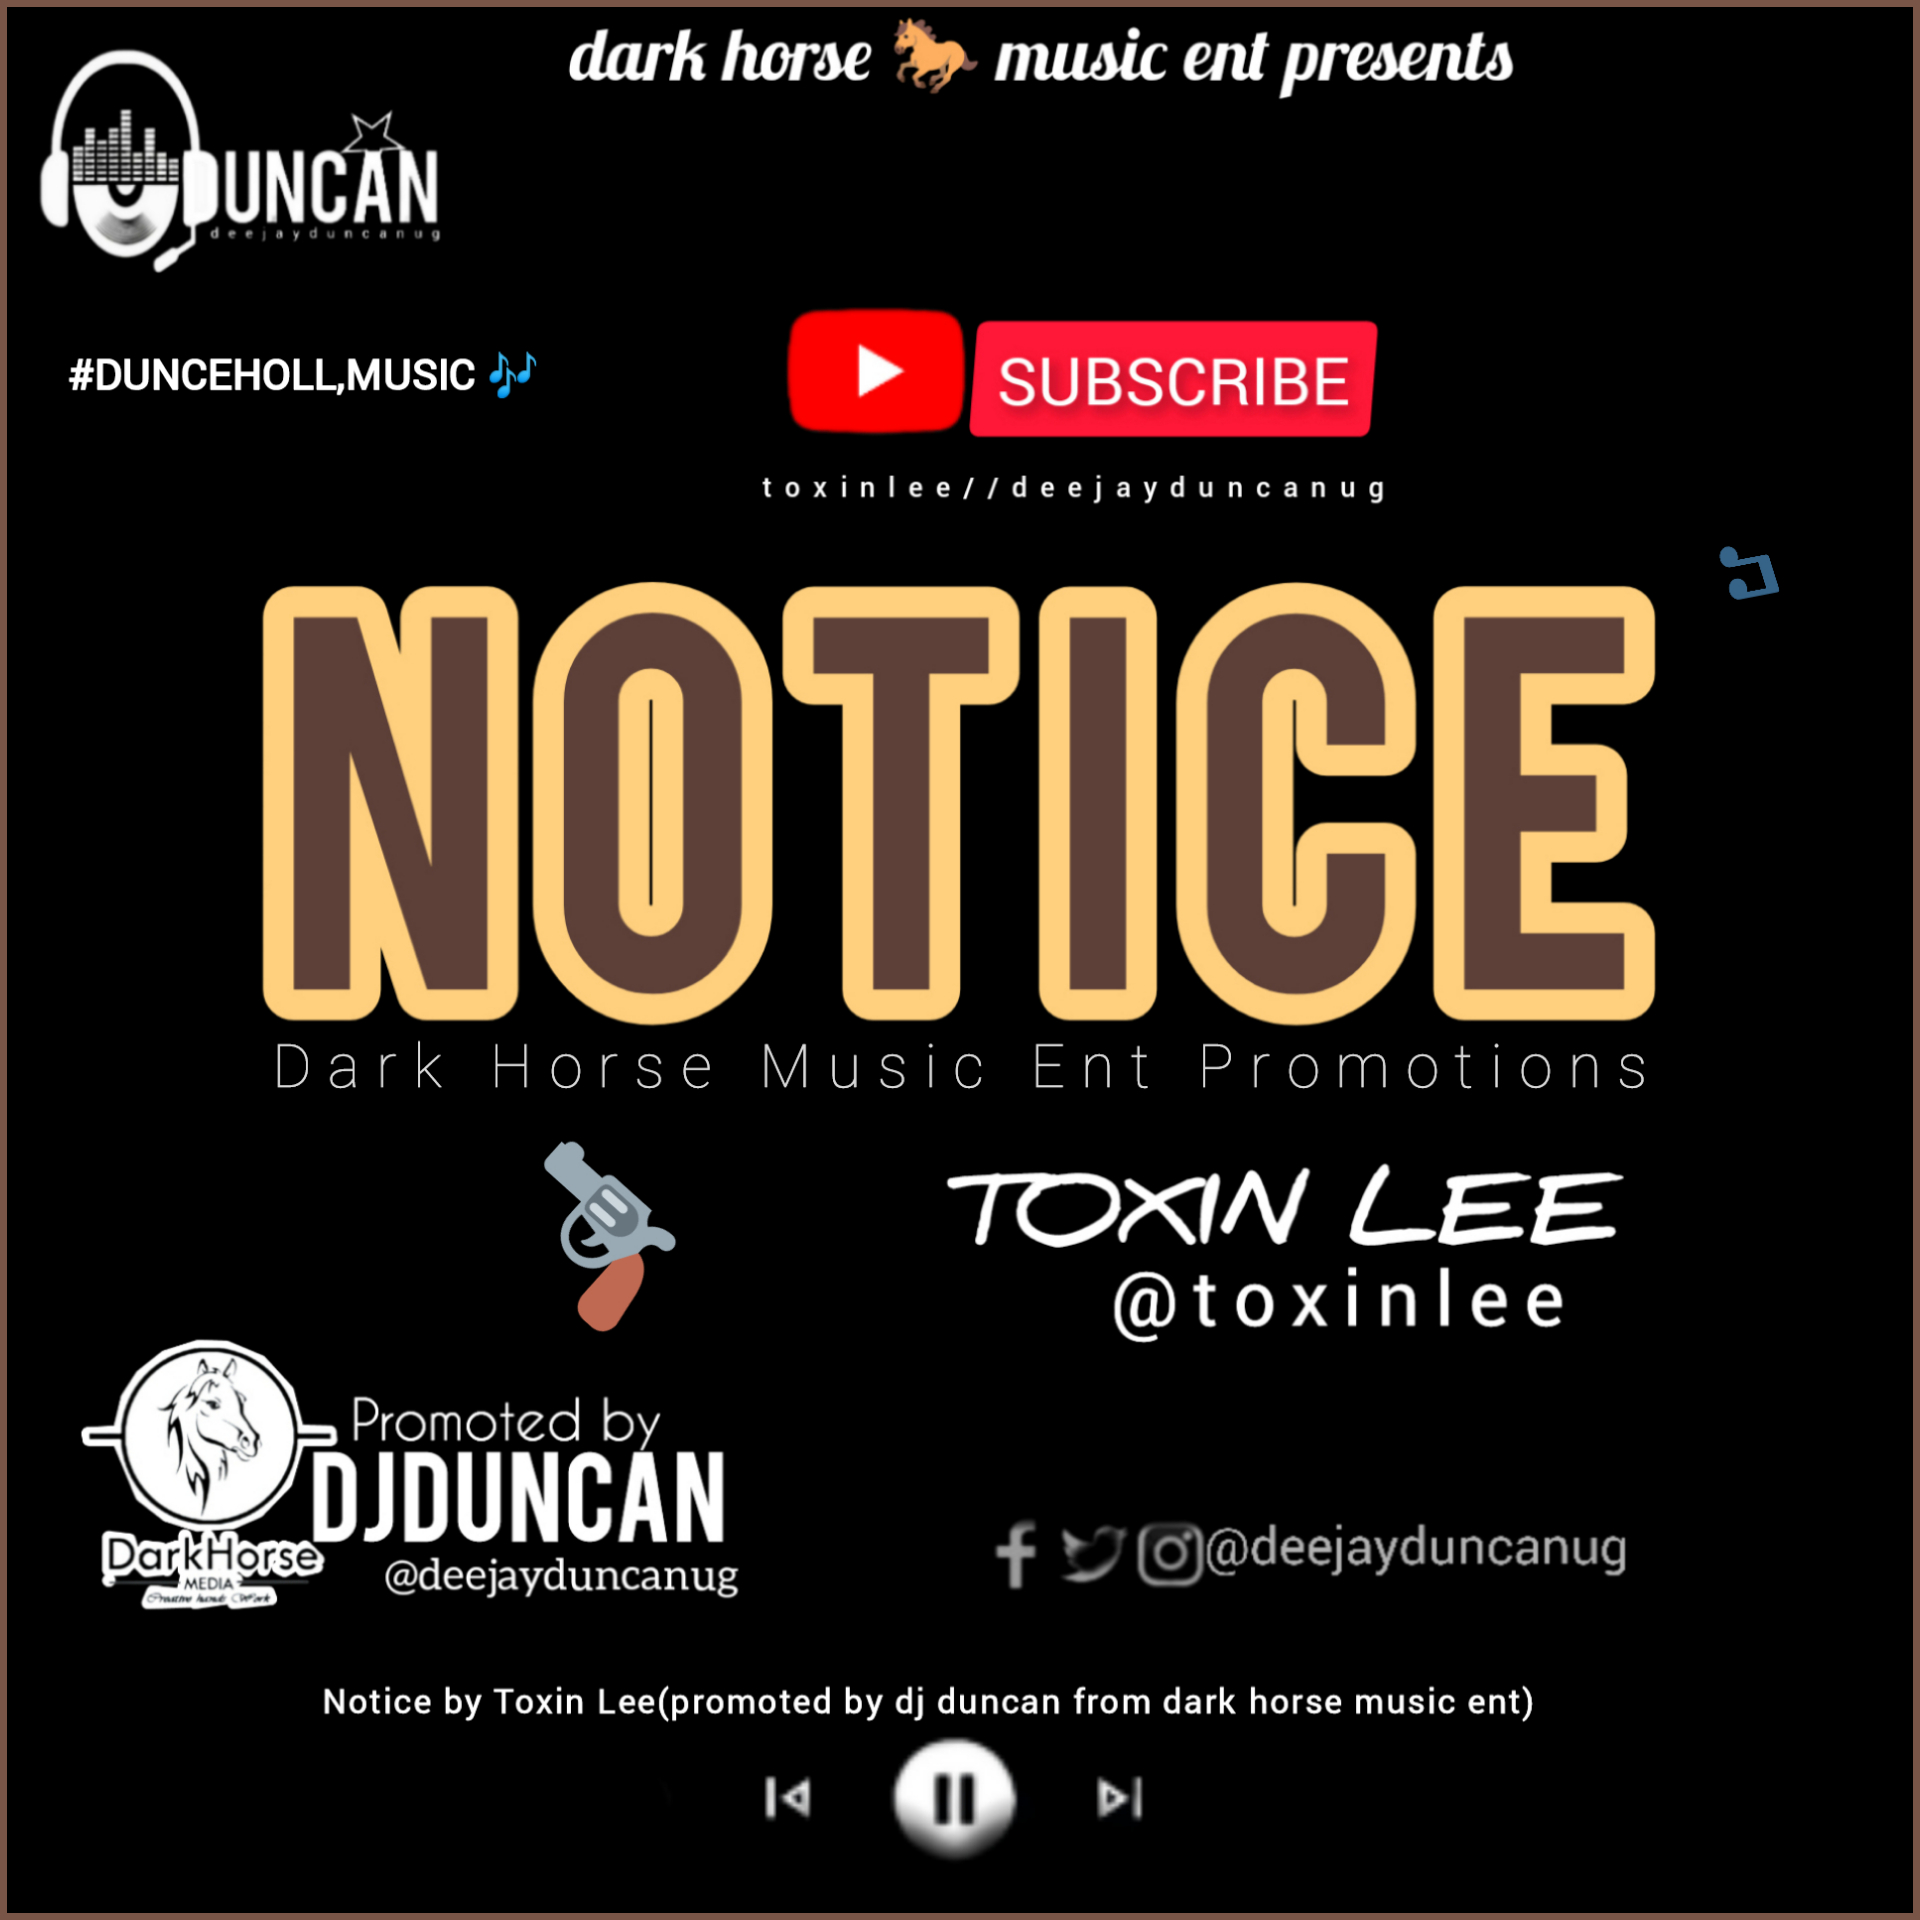 Red Notice by Toxin Lee  promoted